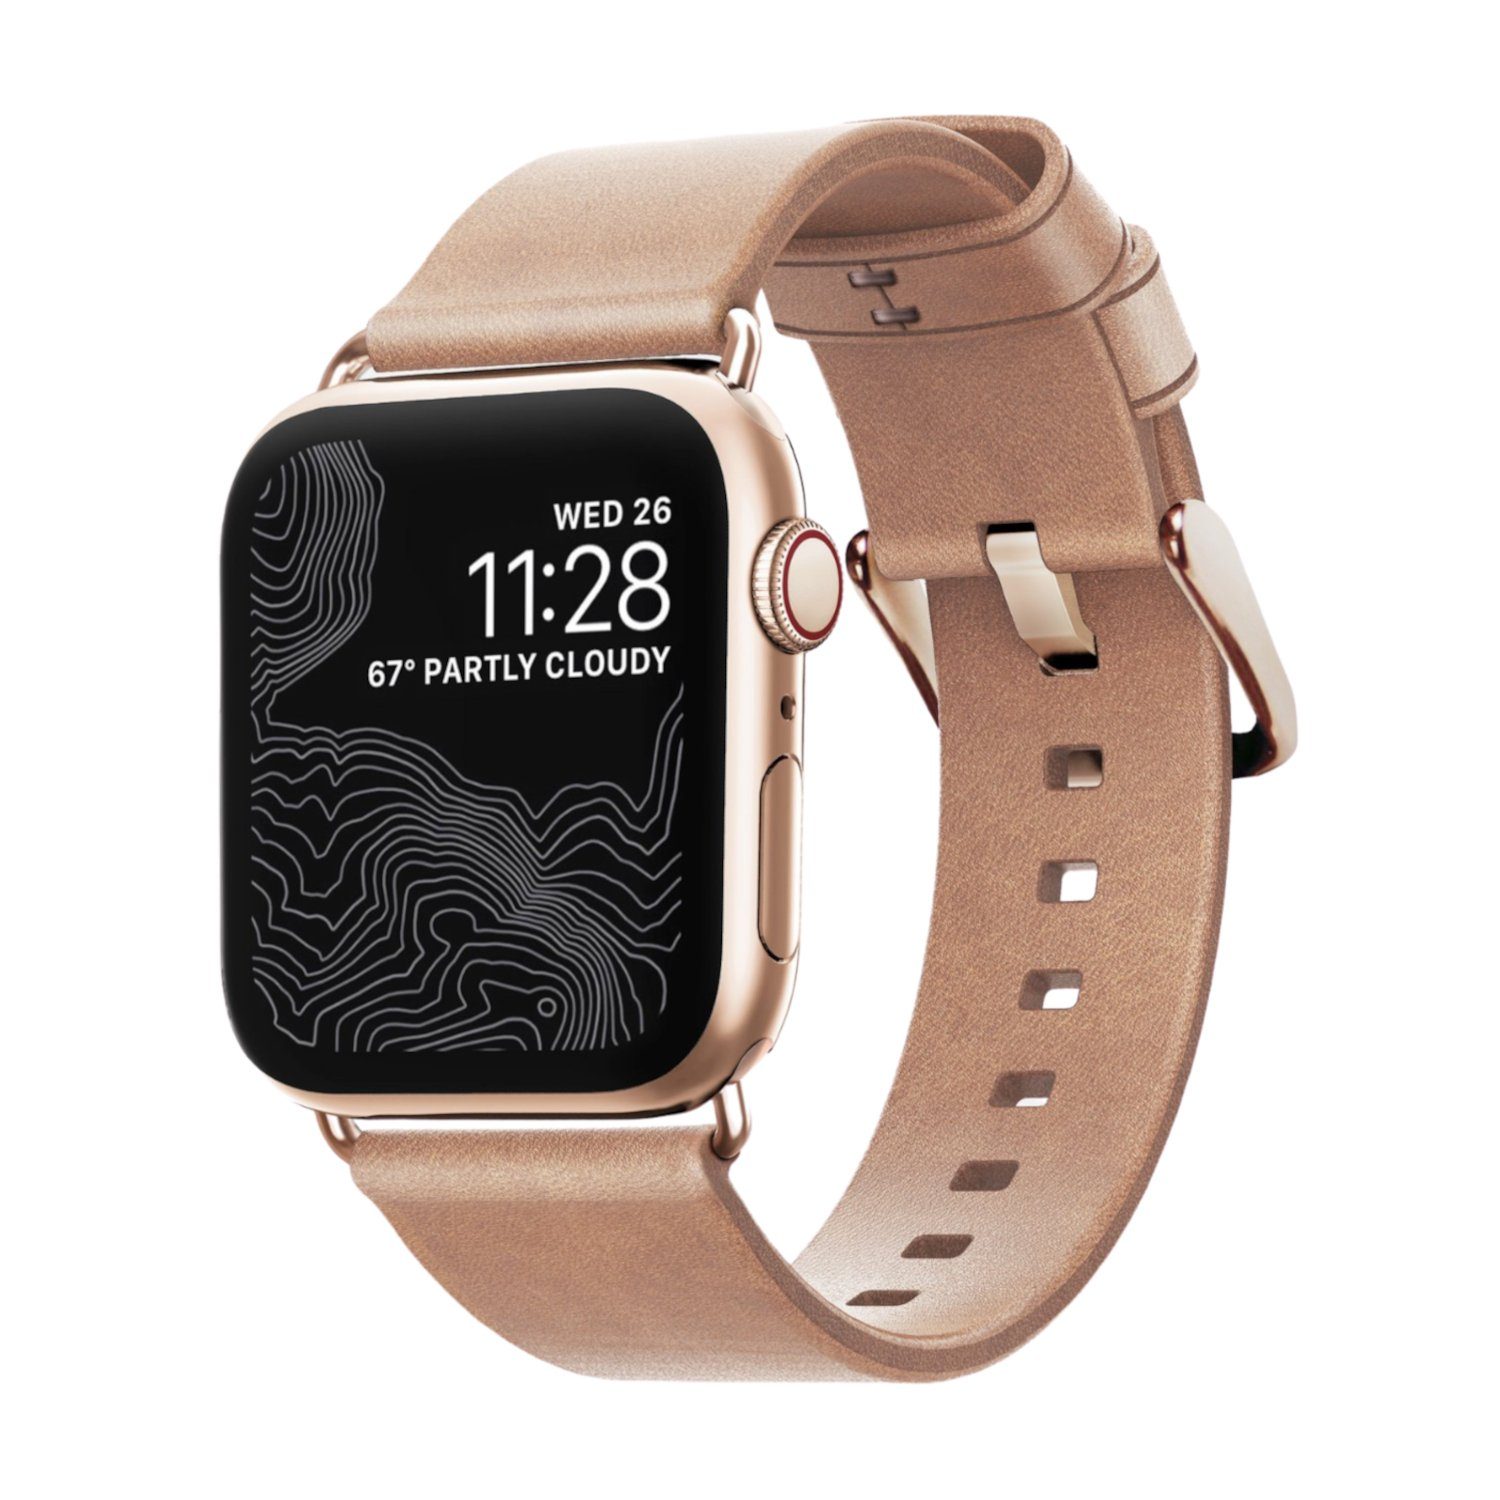 NOMAD Modern Strap Natural Horween Leather for Apple Watch 40mm/38mm, Gold Hardware Apple Watch Strap NOMAD 